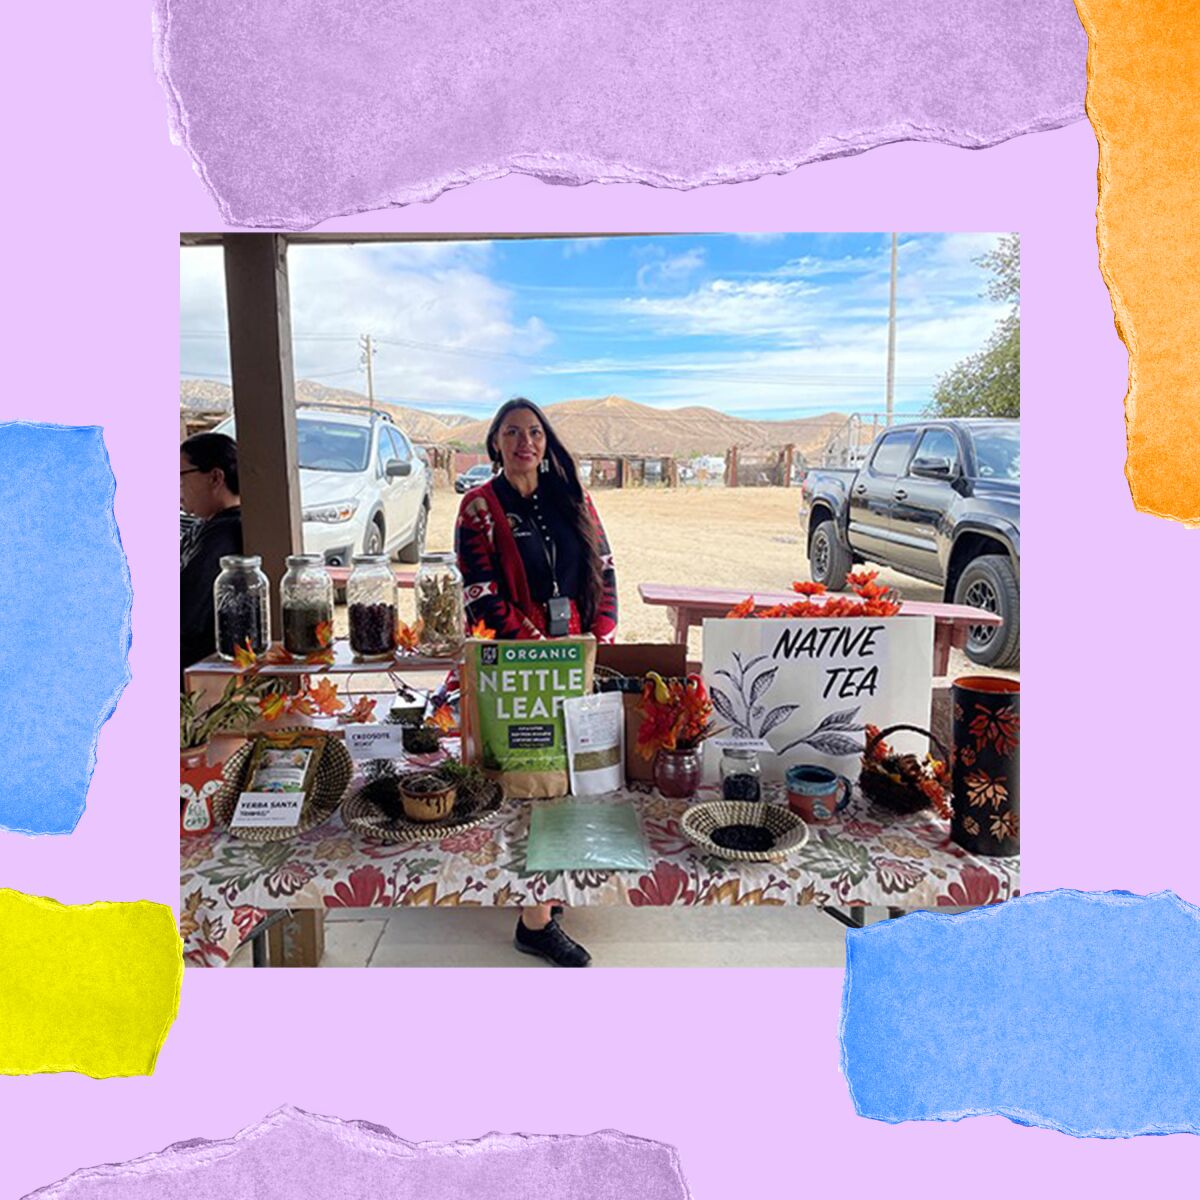 A woman stands at a table with jars and snacks and a sign that says "Native Tea."